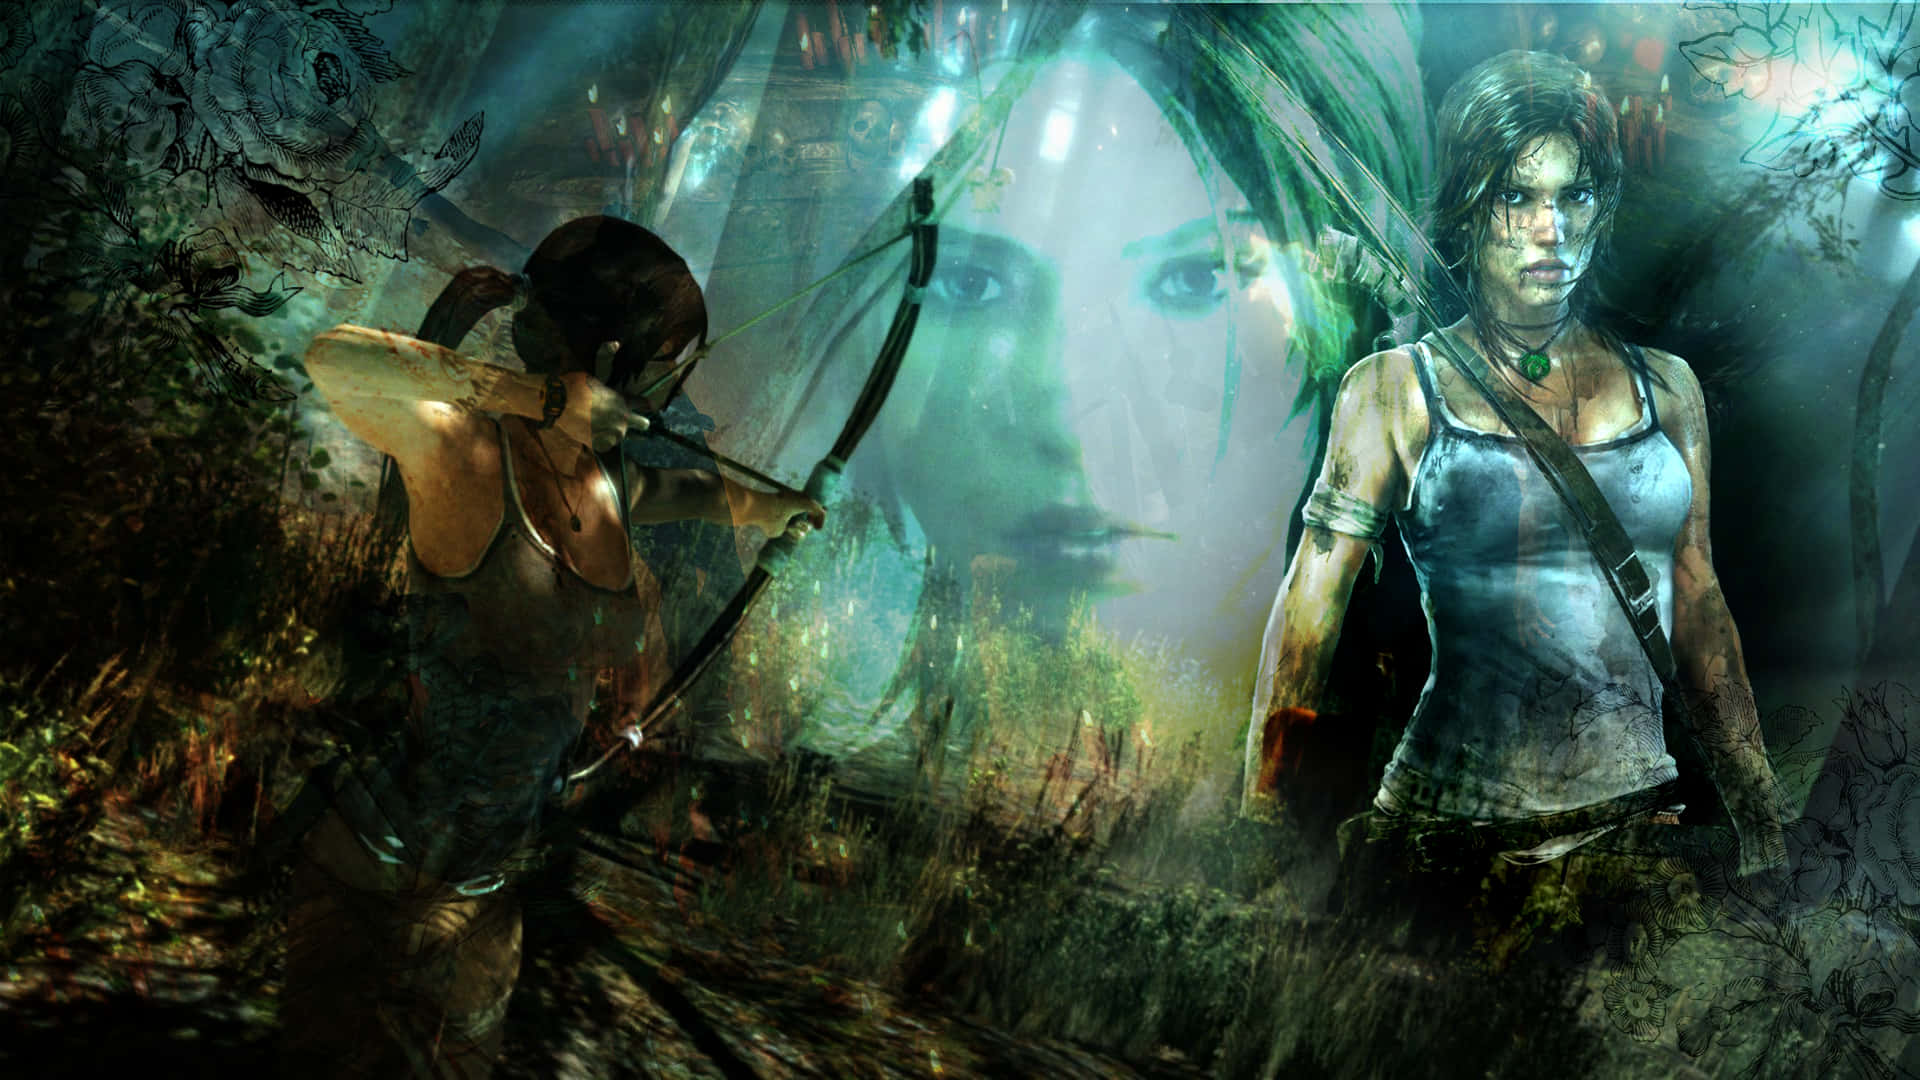 Lara Croft on a perilous mission in Shadow of Tomb Raider. Wallpaper